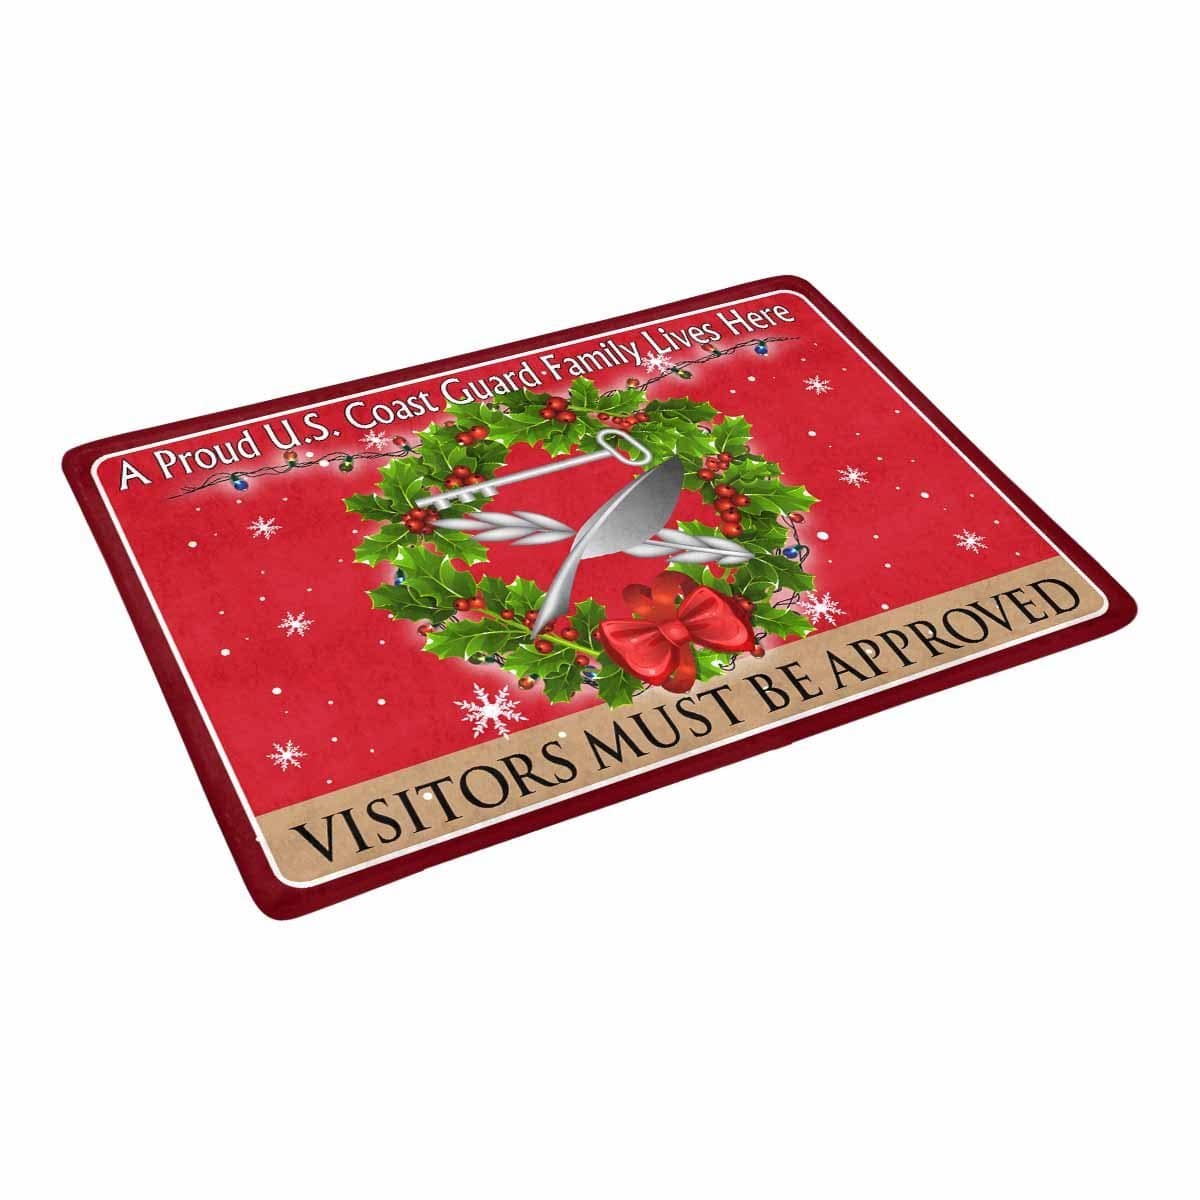 USCG CULINARY SPECIALIST CS Logo - Visitors must be approved Christmas Doormat-Doormat-USCG-Rate-Veterans Nation